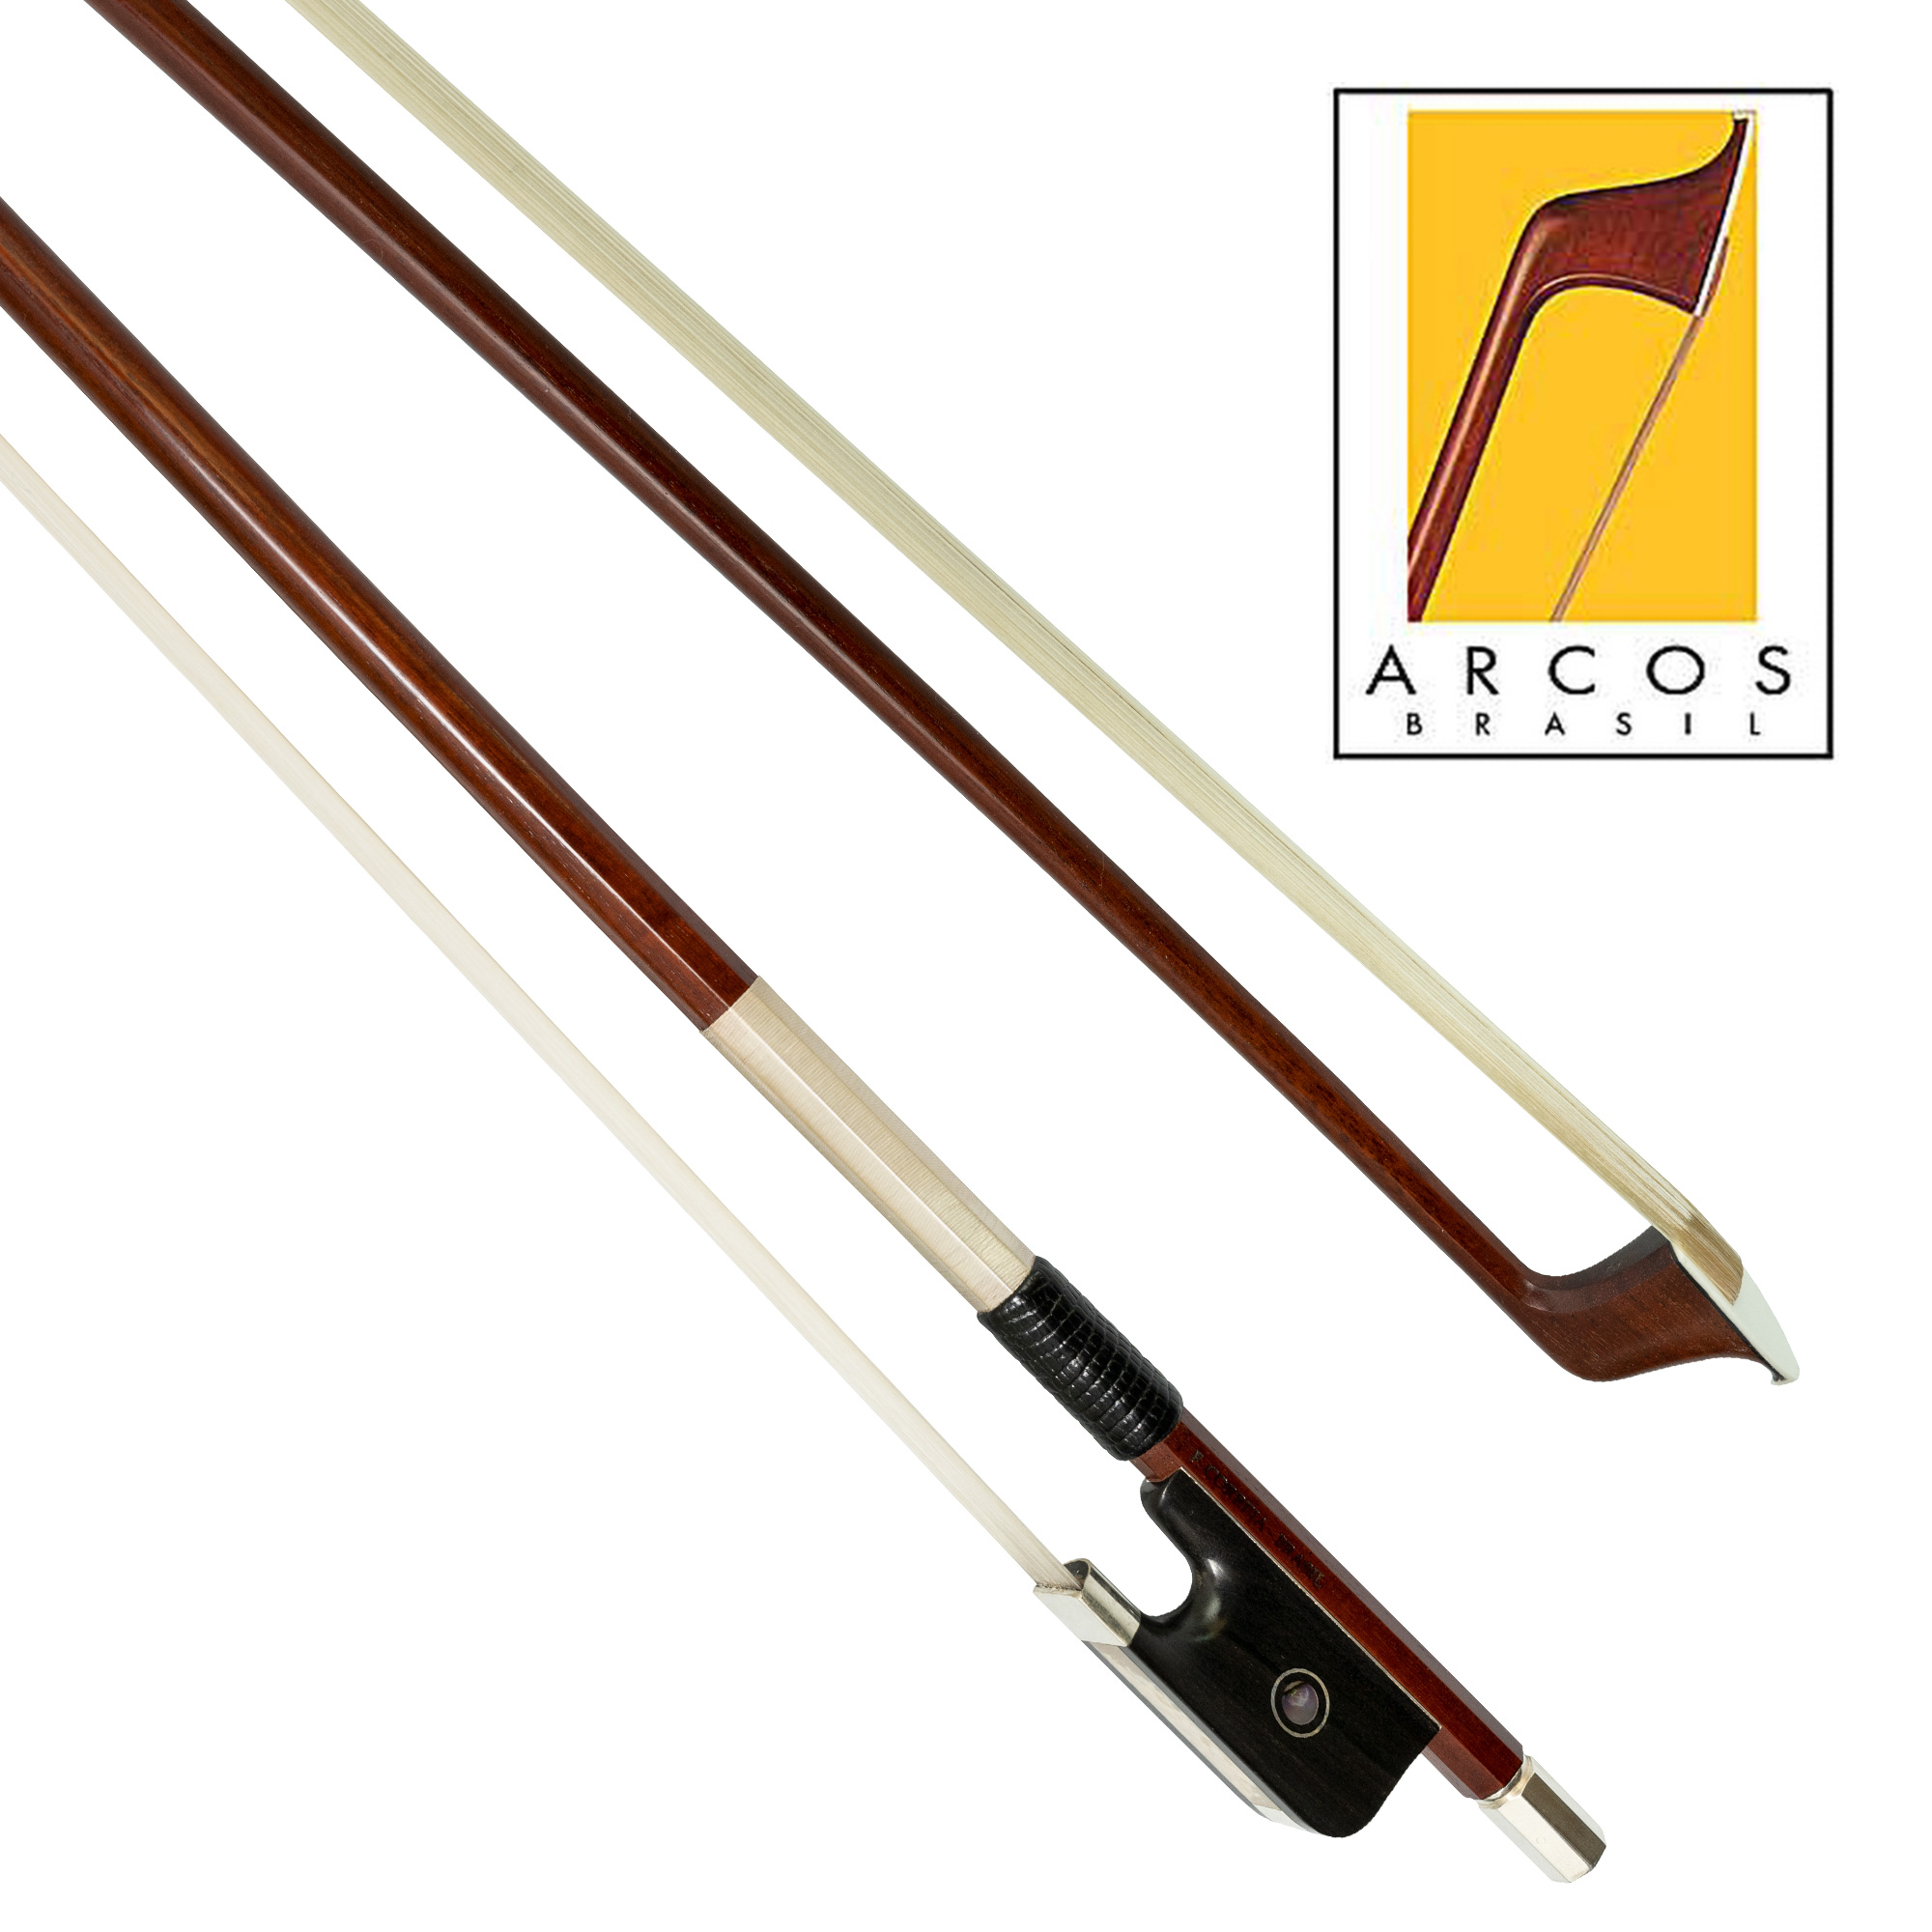 Arcos Brasil Silver-Mounted Sartory Copy Viola Bow in action